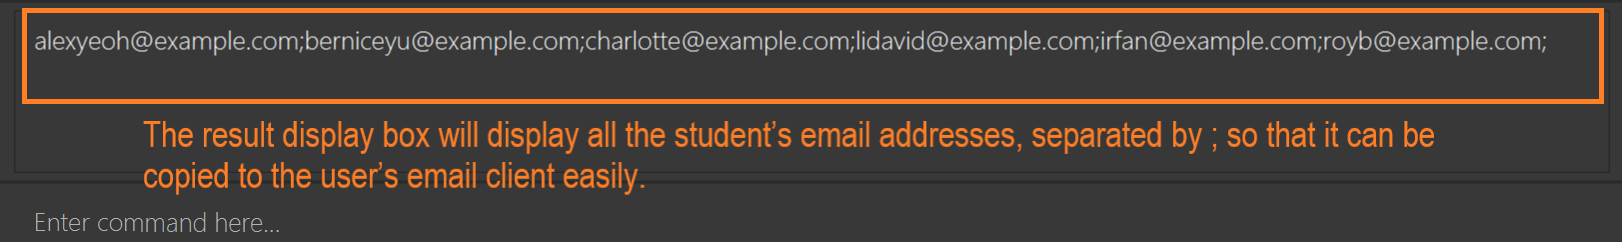 emails_result_example